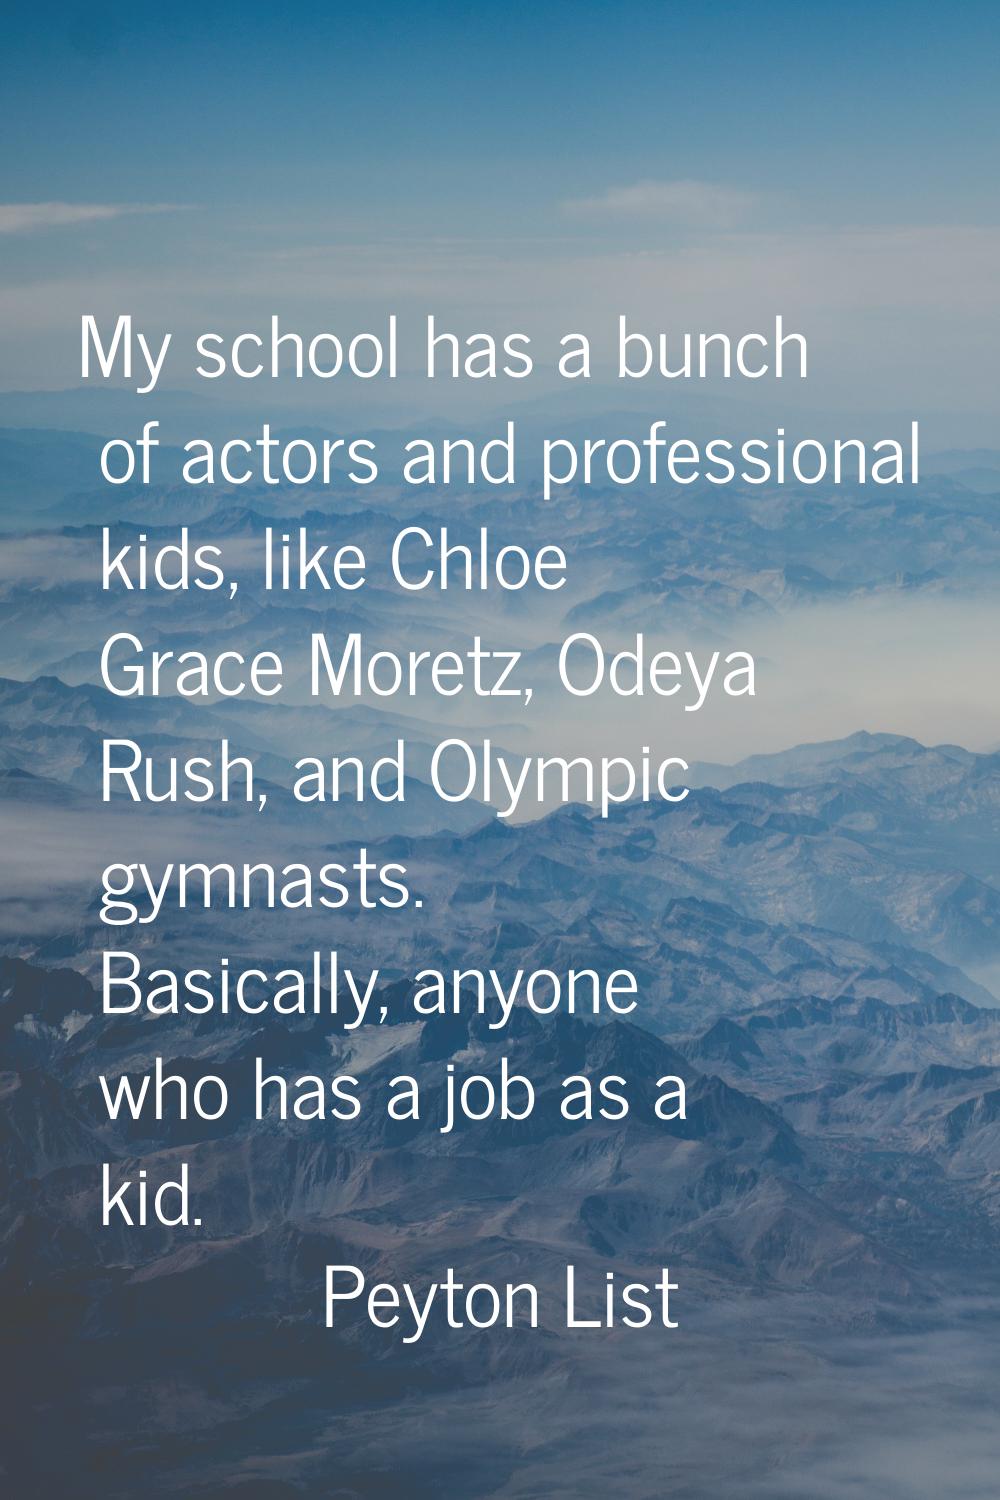 My school has a bunch of actors and professional kids, like Chloe Grace Moretz, Odeya Rush, and Oly